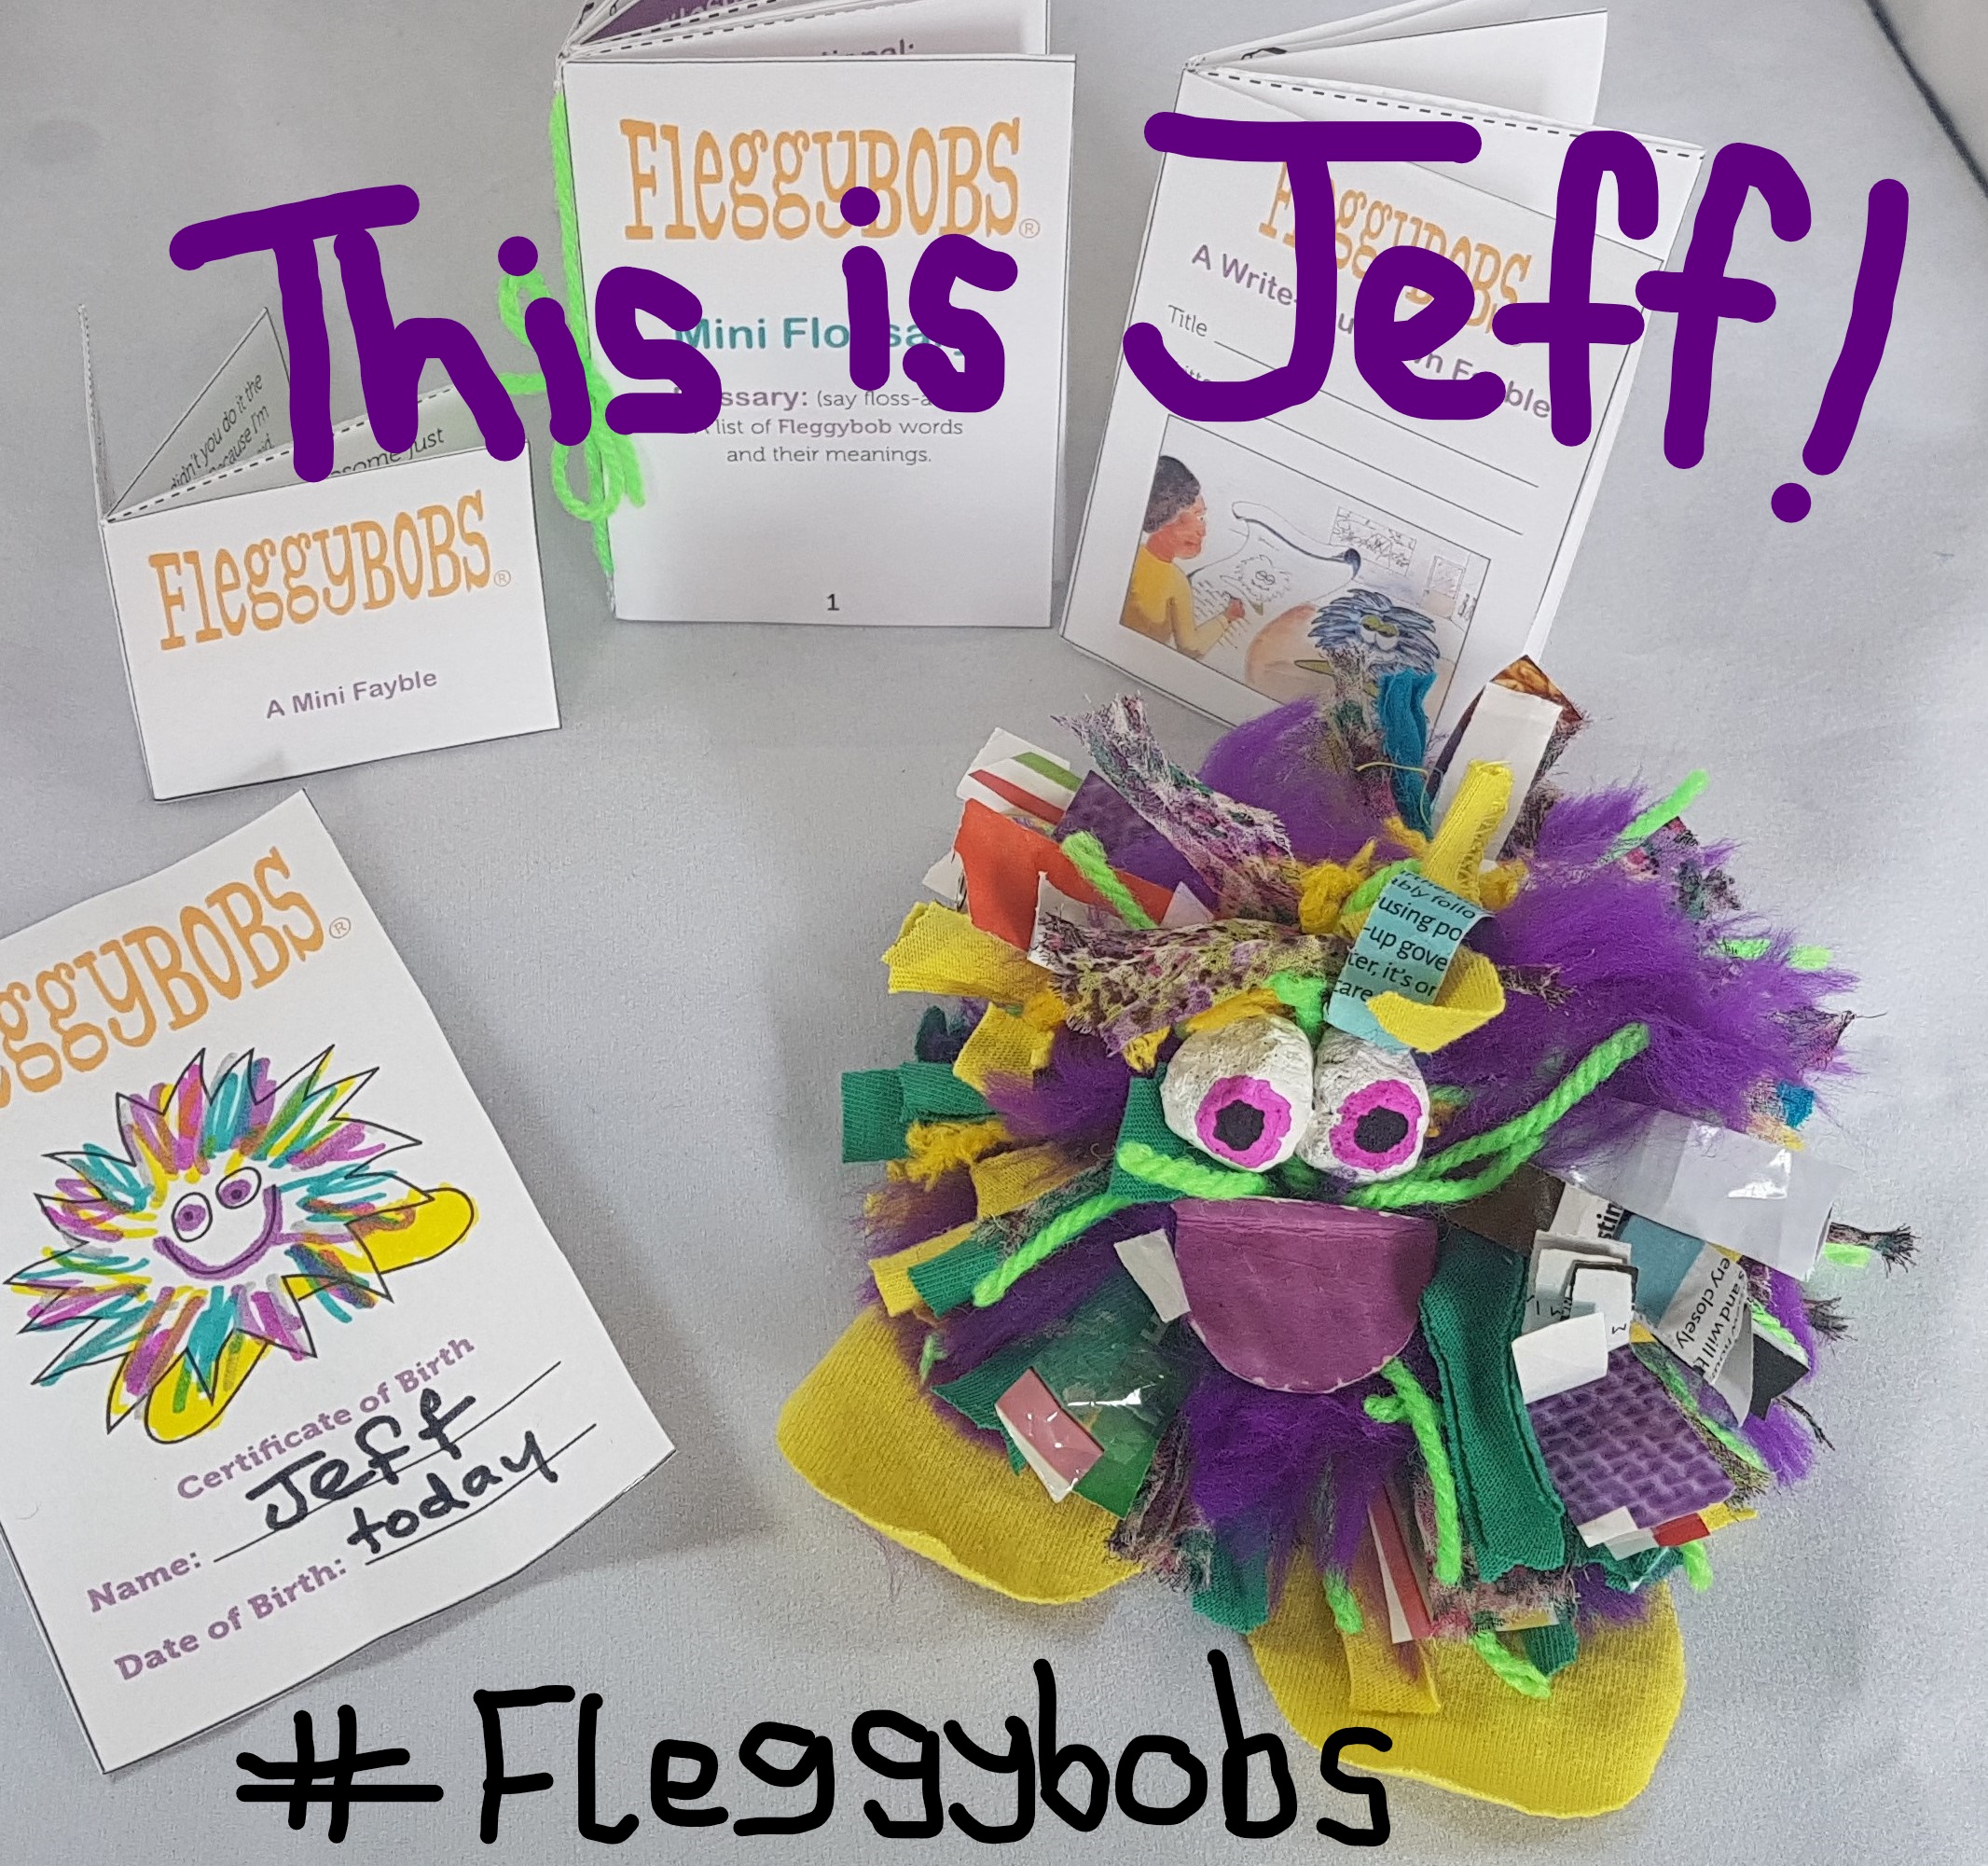 A picture of a Fleggybob called Jeff